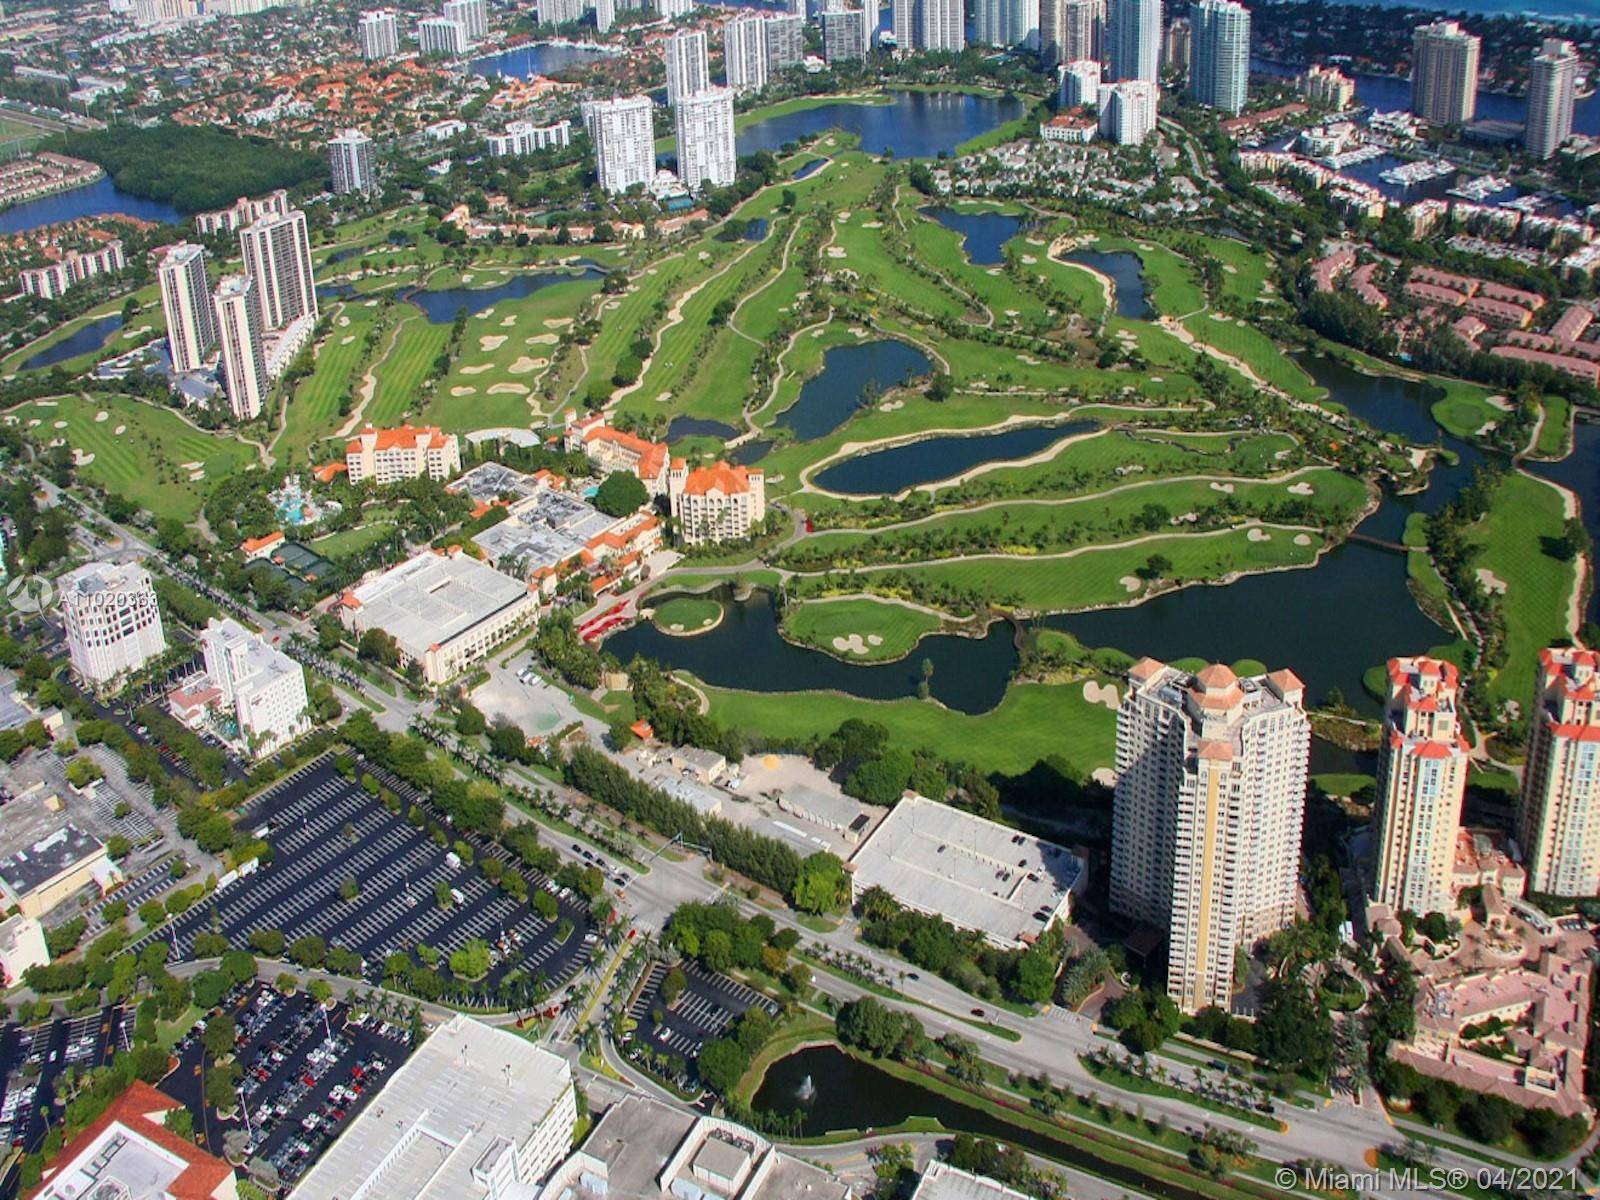 GORGEOUS 2 BED 2 BATH IN THE HEART OF AVENTURA WITH BREATHTAKING VIEWS OF TURNBERRY GOLF COURSE NEXT TO JW MARRIOTT MIAMI TURNBERRY RESORT.